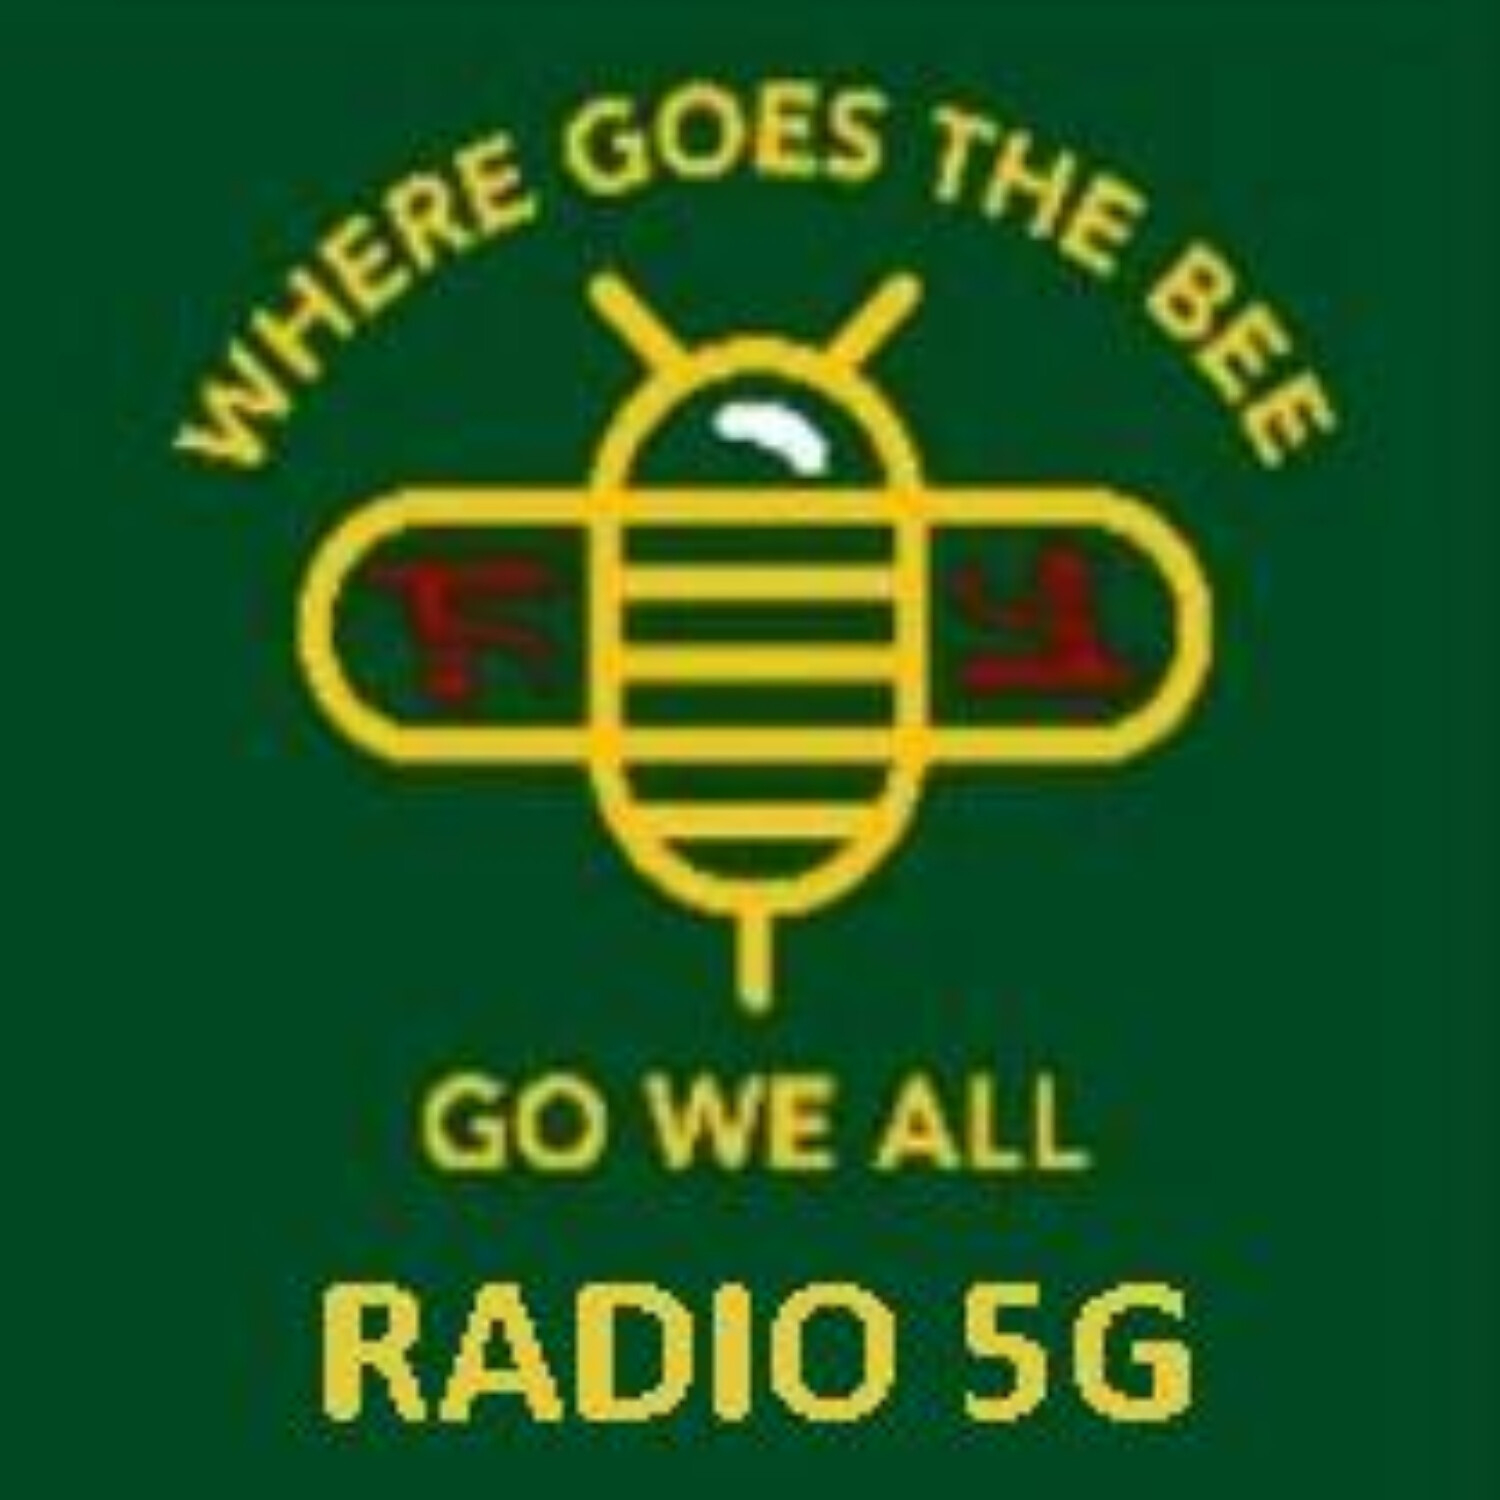 “RADIO 5G” 4/27/22 - Catherine Austin-Fitts on The Great Poisoning.